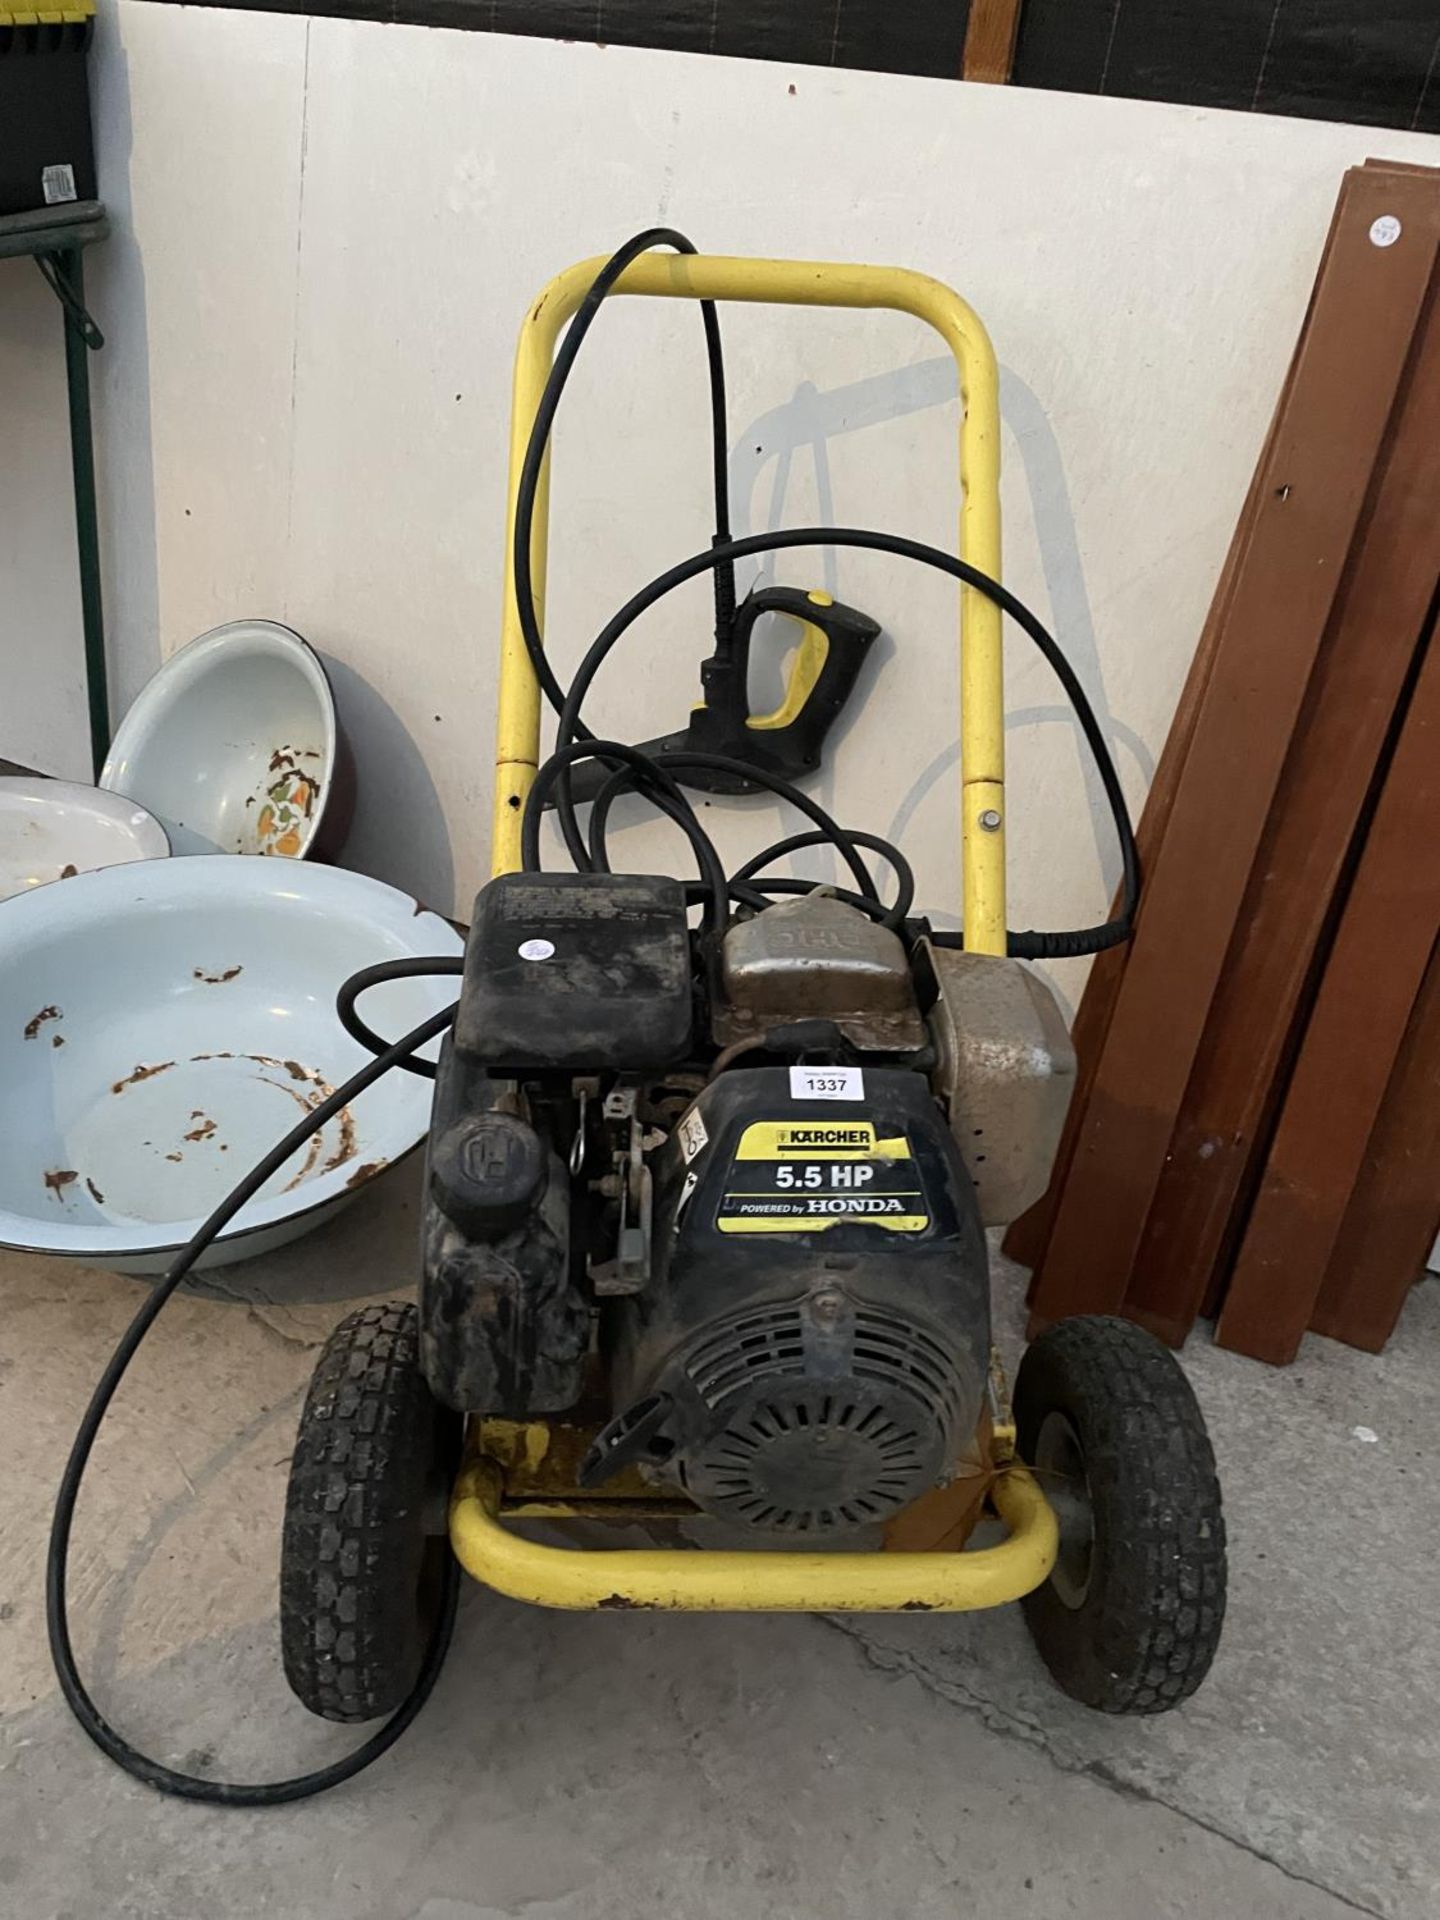 A KARCHER 5.5 HP PRESSURE WASHER WITH HONDA ENGINE - Image 2 of 4